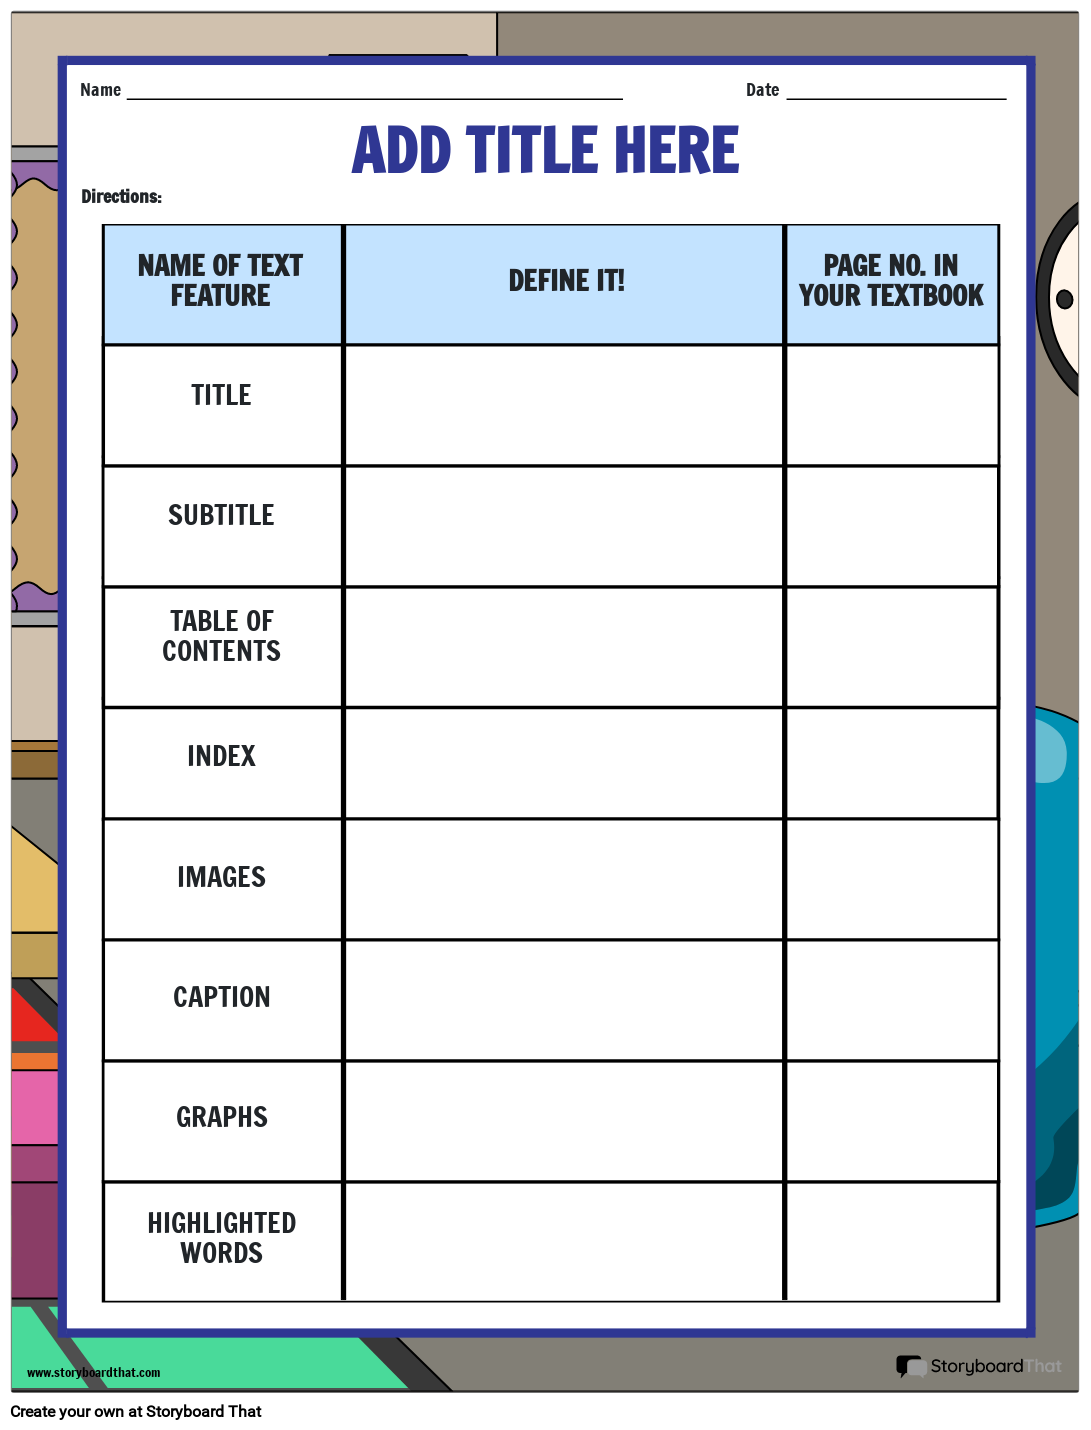 Defining and Exploring Text Features in a Book Worksheet